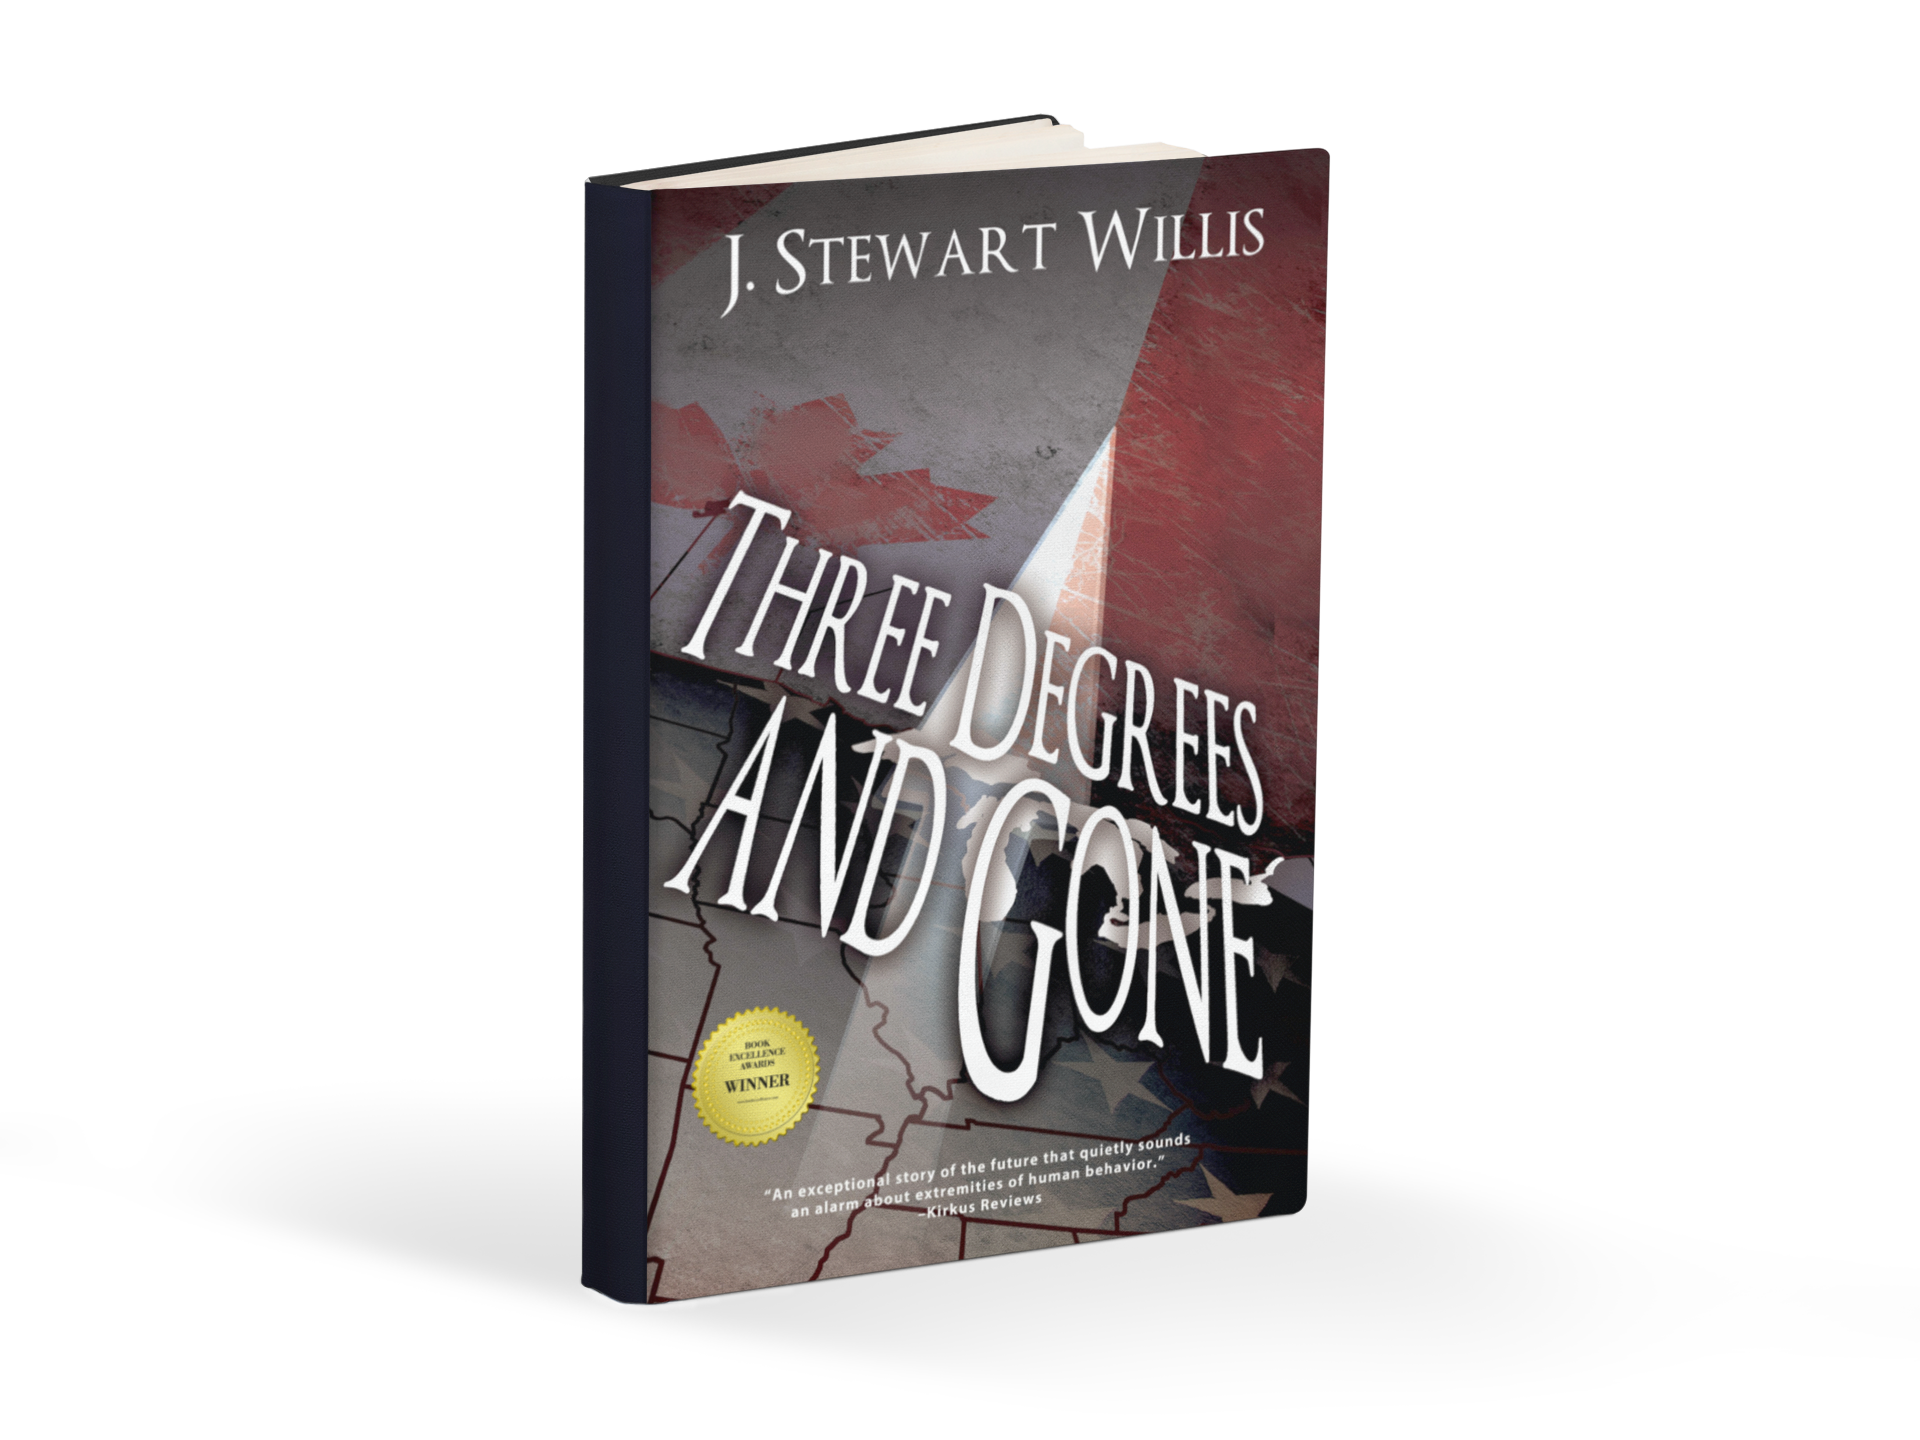 Three Degrees and Gone by J. Stewart Willis Named Winner of 2022 Top Book Award